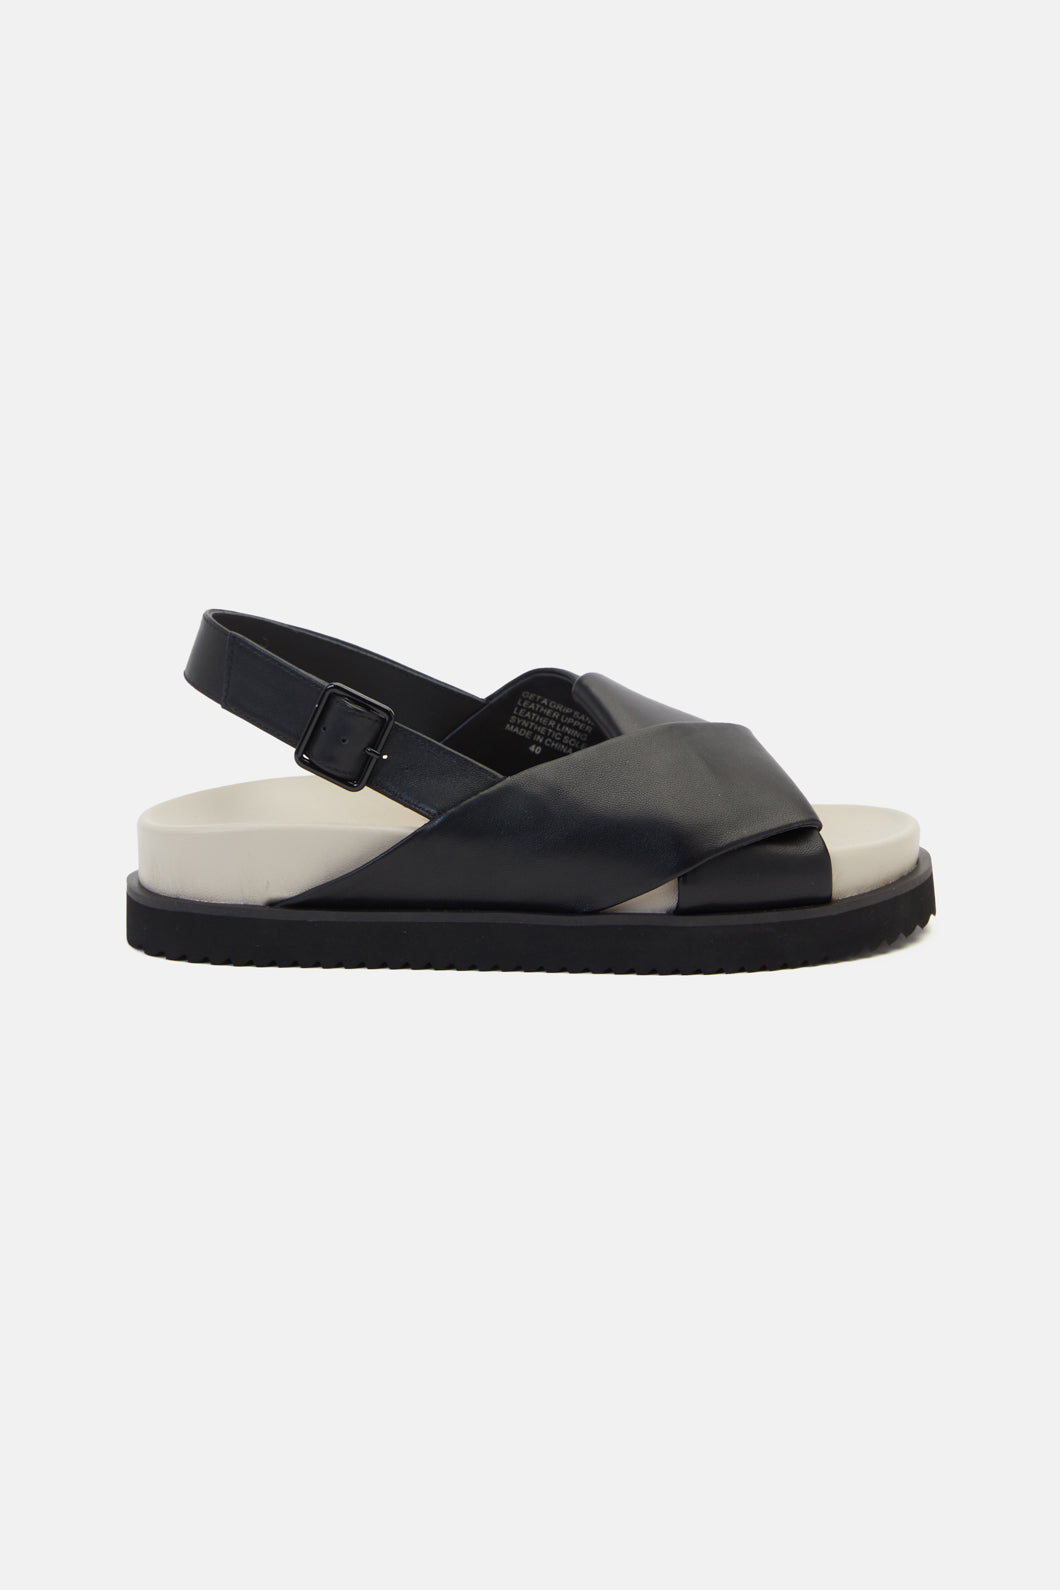 Buy Truffle Collection Women's Black Casual Sandals for Women at Best Price  @ Tata CLiQ